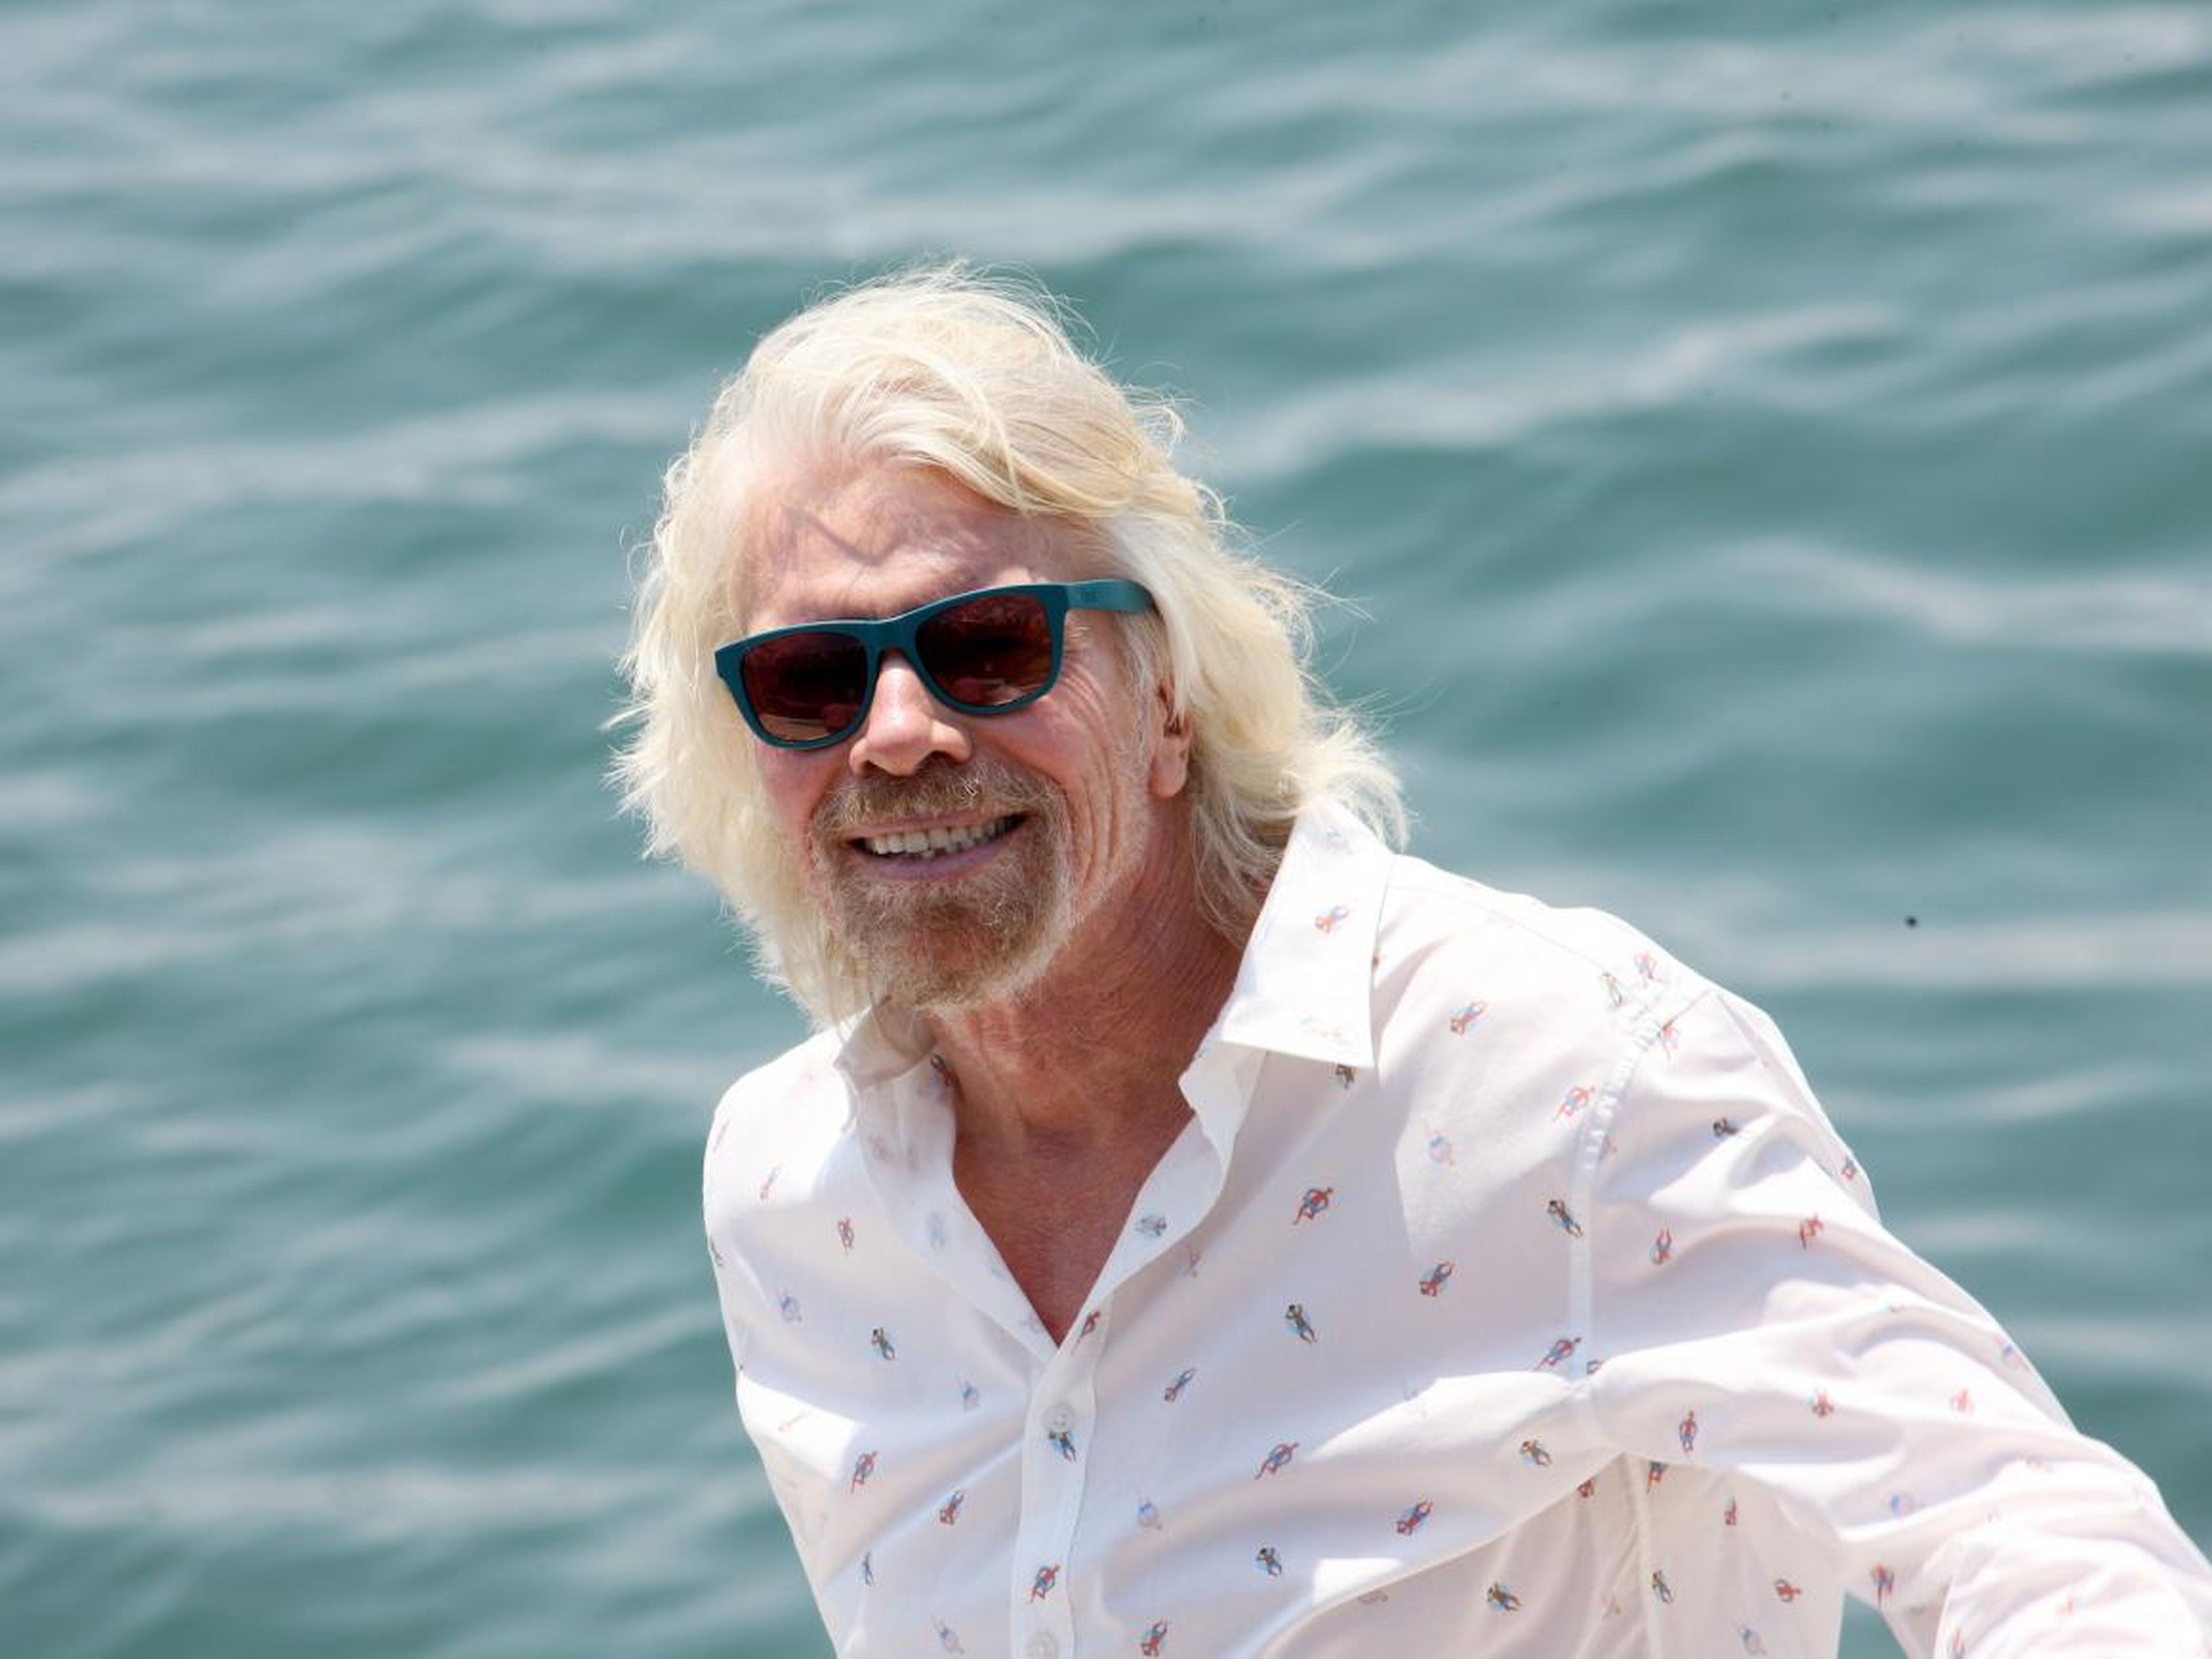 To Branson, the biggest luxury isn't money: "If we're talking about personal luxuries — and the luxury of being your own boss — the biggest reward is the amount of time one can find for family and friends."